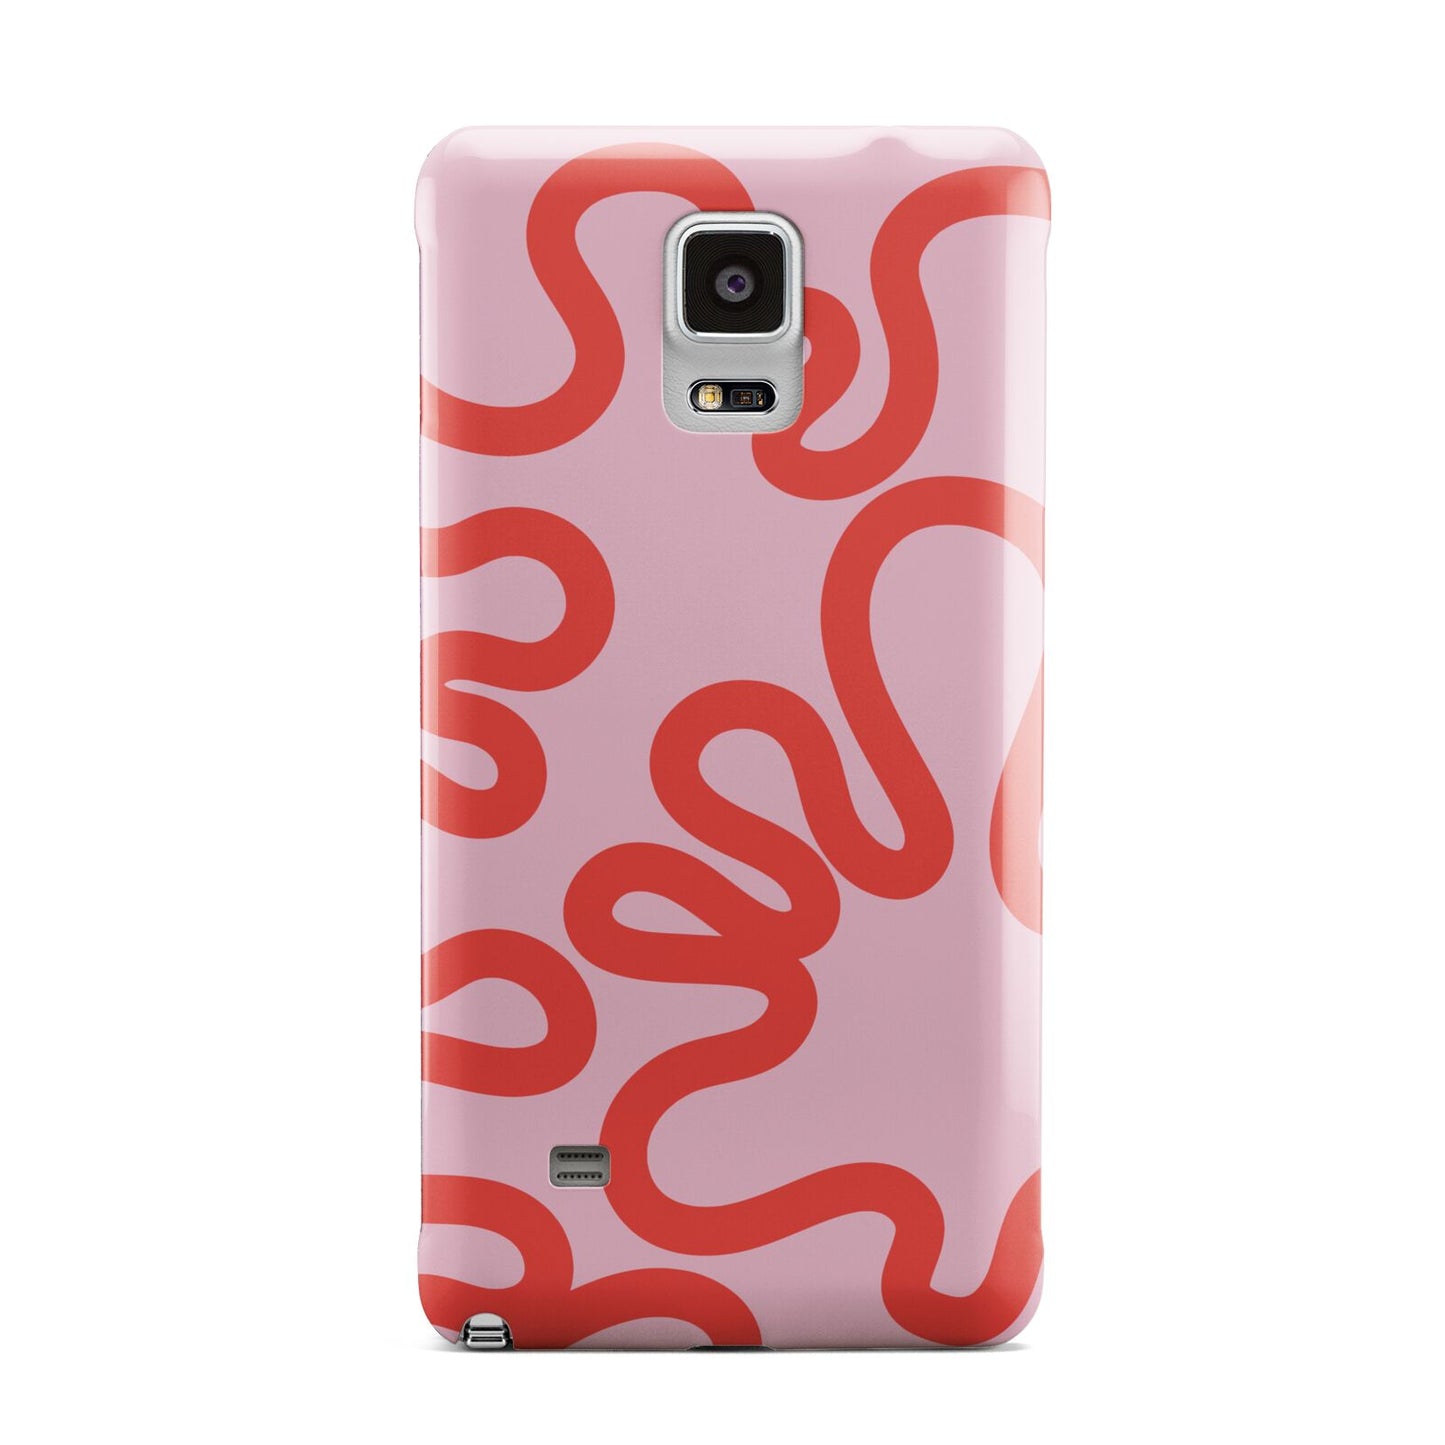 Squiggle Samsung Galaxy Note 4 Case